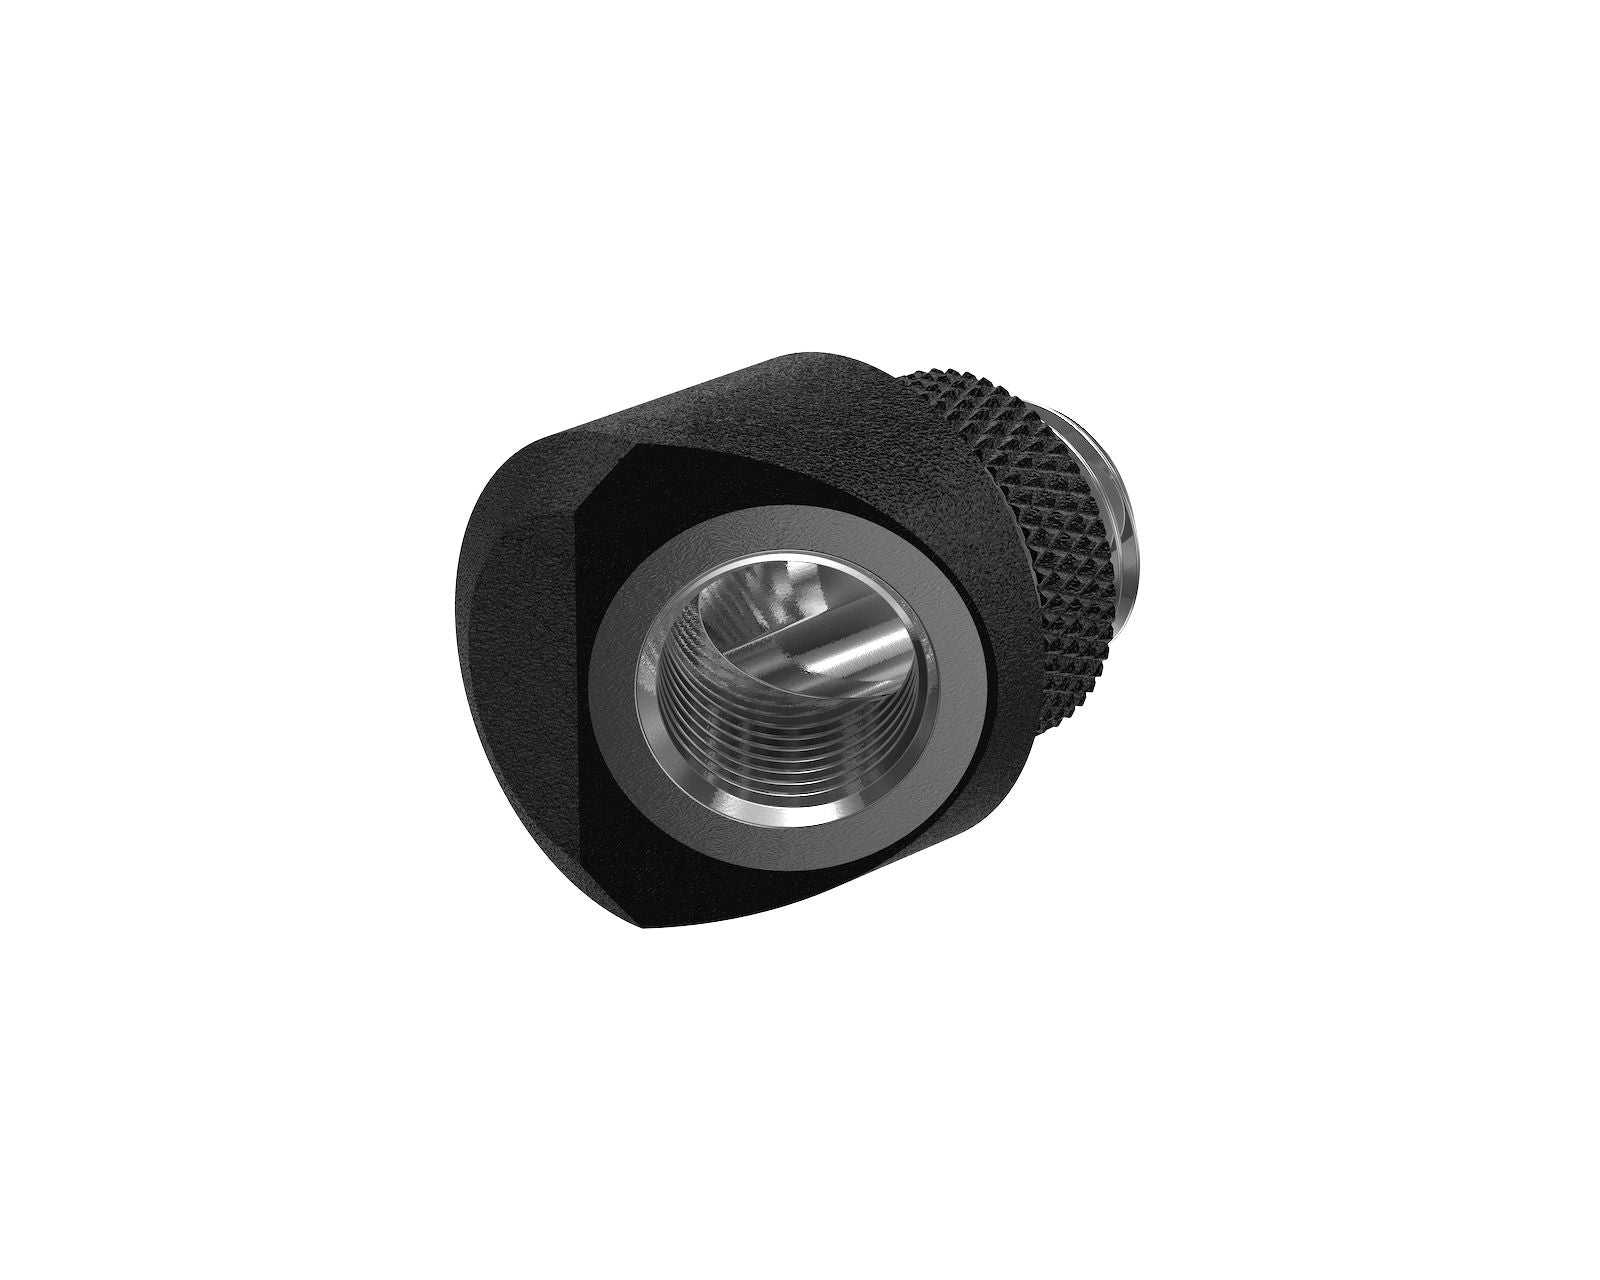 PrimoChill InterConnectSX Flat 45 Degree Rotary Fitting (FAF45) – Enhanced PC Cooling with Sleek Aesthetics - Available in 20+ Colors, Custom Watercooling Loop Ready - TX Matte Black